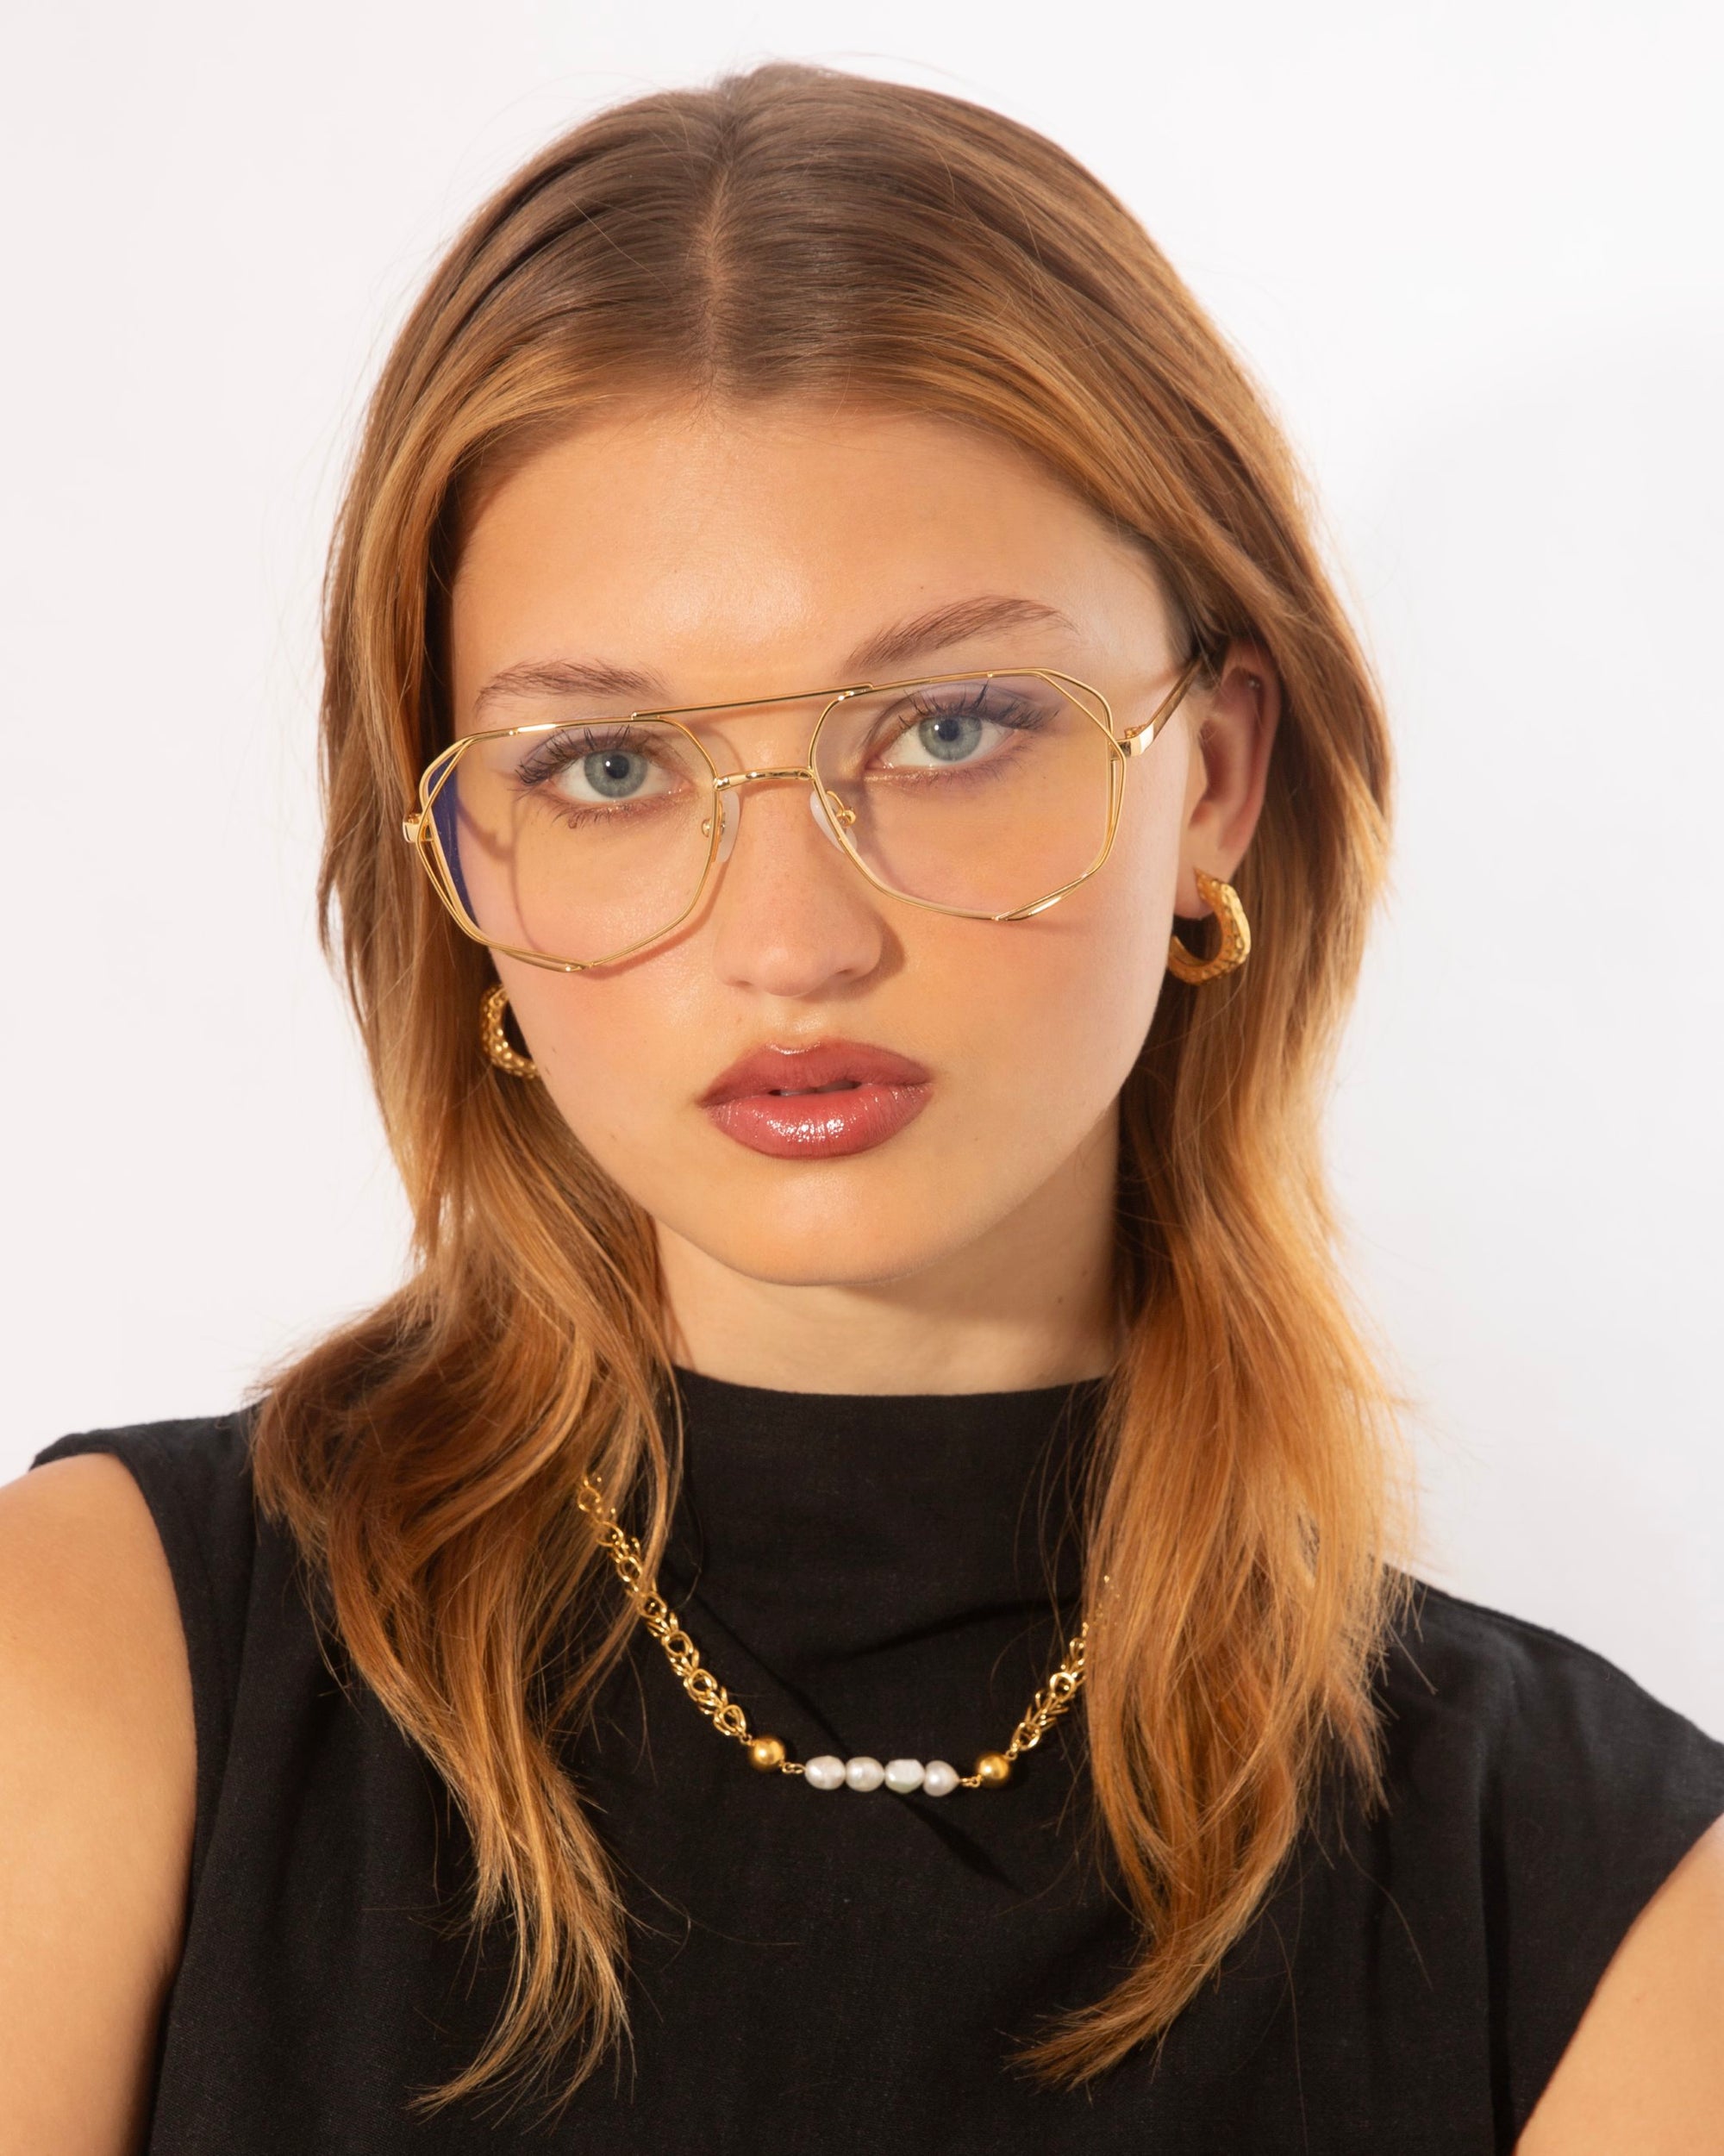 A young woman with straight reddish-brown hair and wearing For Art&#39;s Sake® Genius Two glasses, looks at the camera. She is dressed in a black sleeveless top and accessorized with gold hoop earrings and a gold necklace with white beads. The background is plain white.